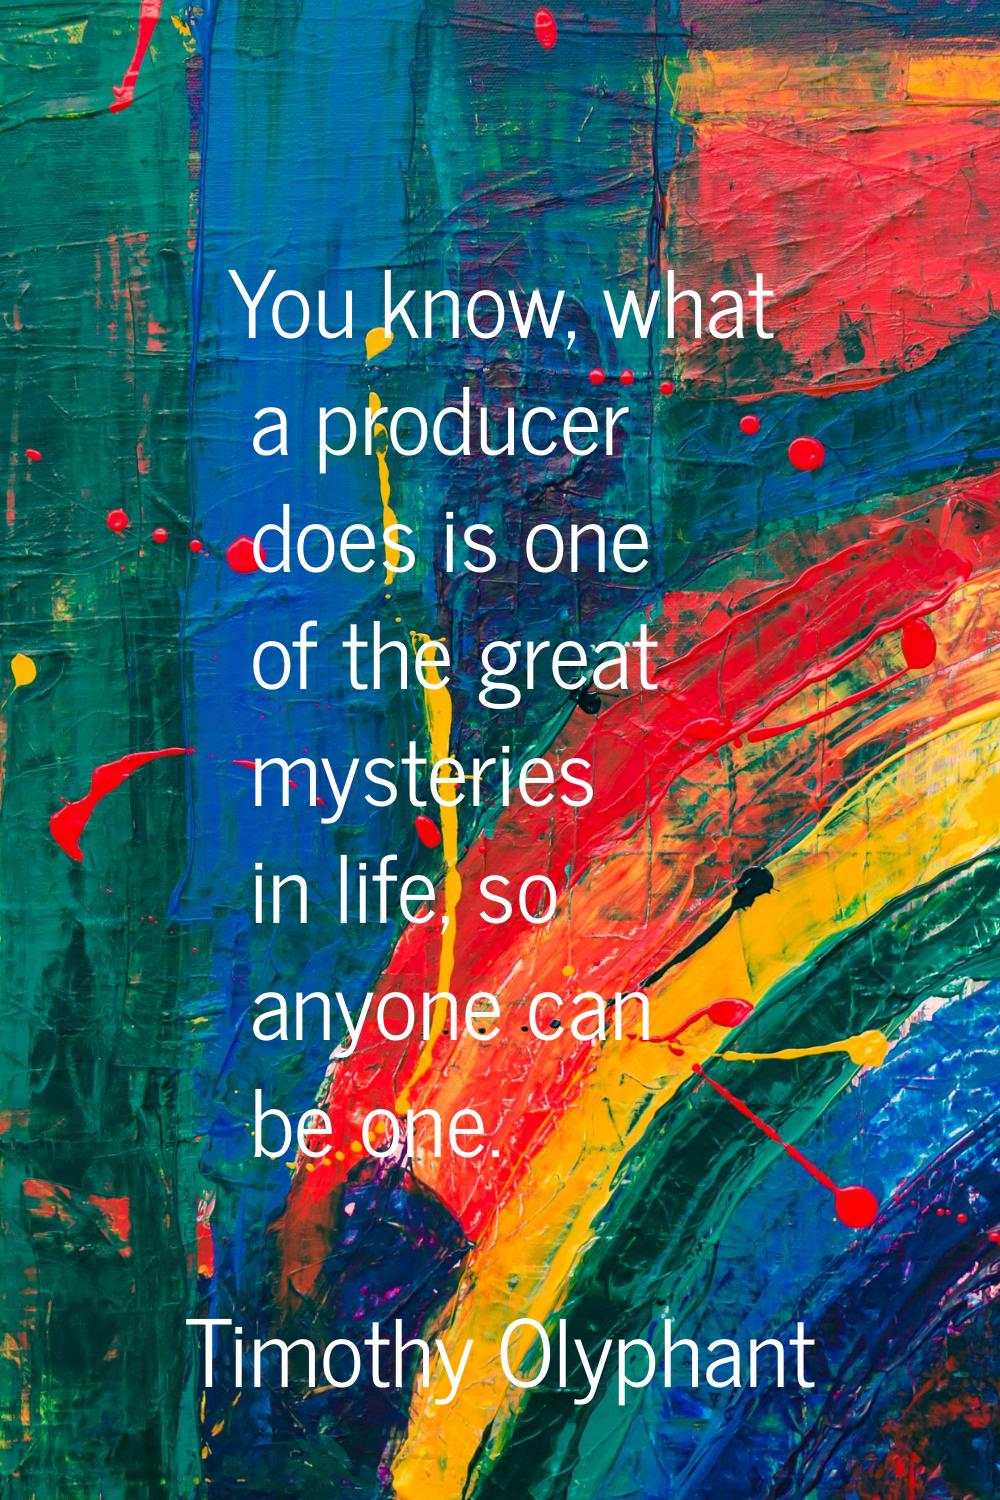 You know, what a producer does is one of the great mysteries in life, so anyone can be one.